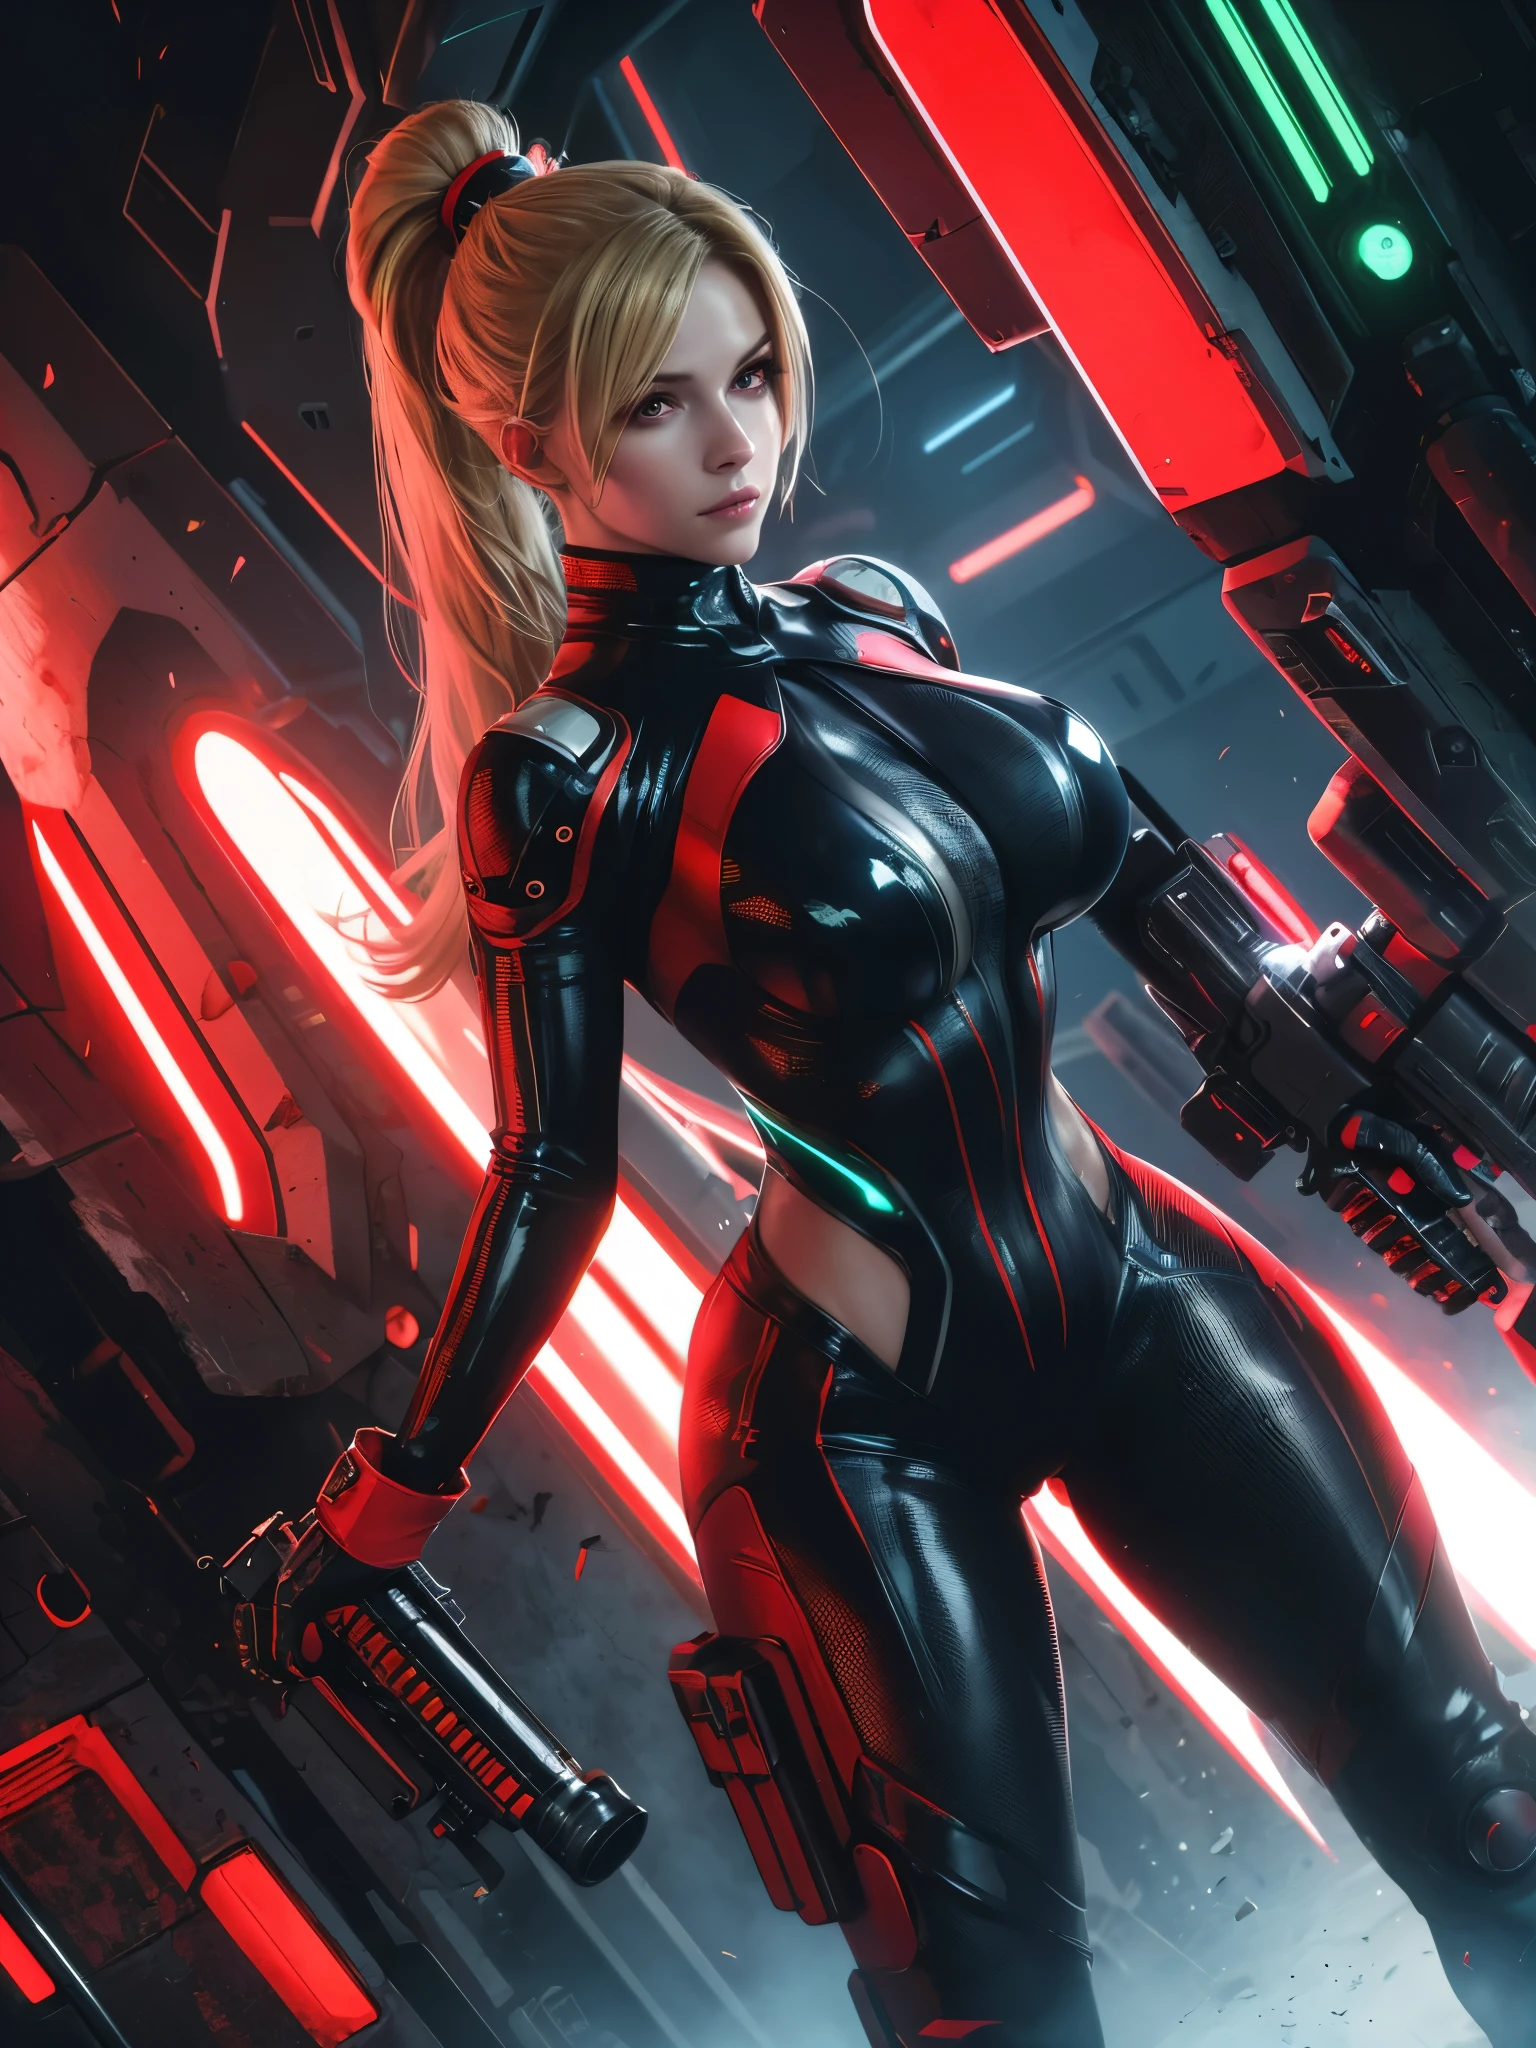 4k, best quality, realistic, detailed, A beautiful woman whose right hand has been modified into a Gatling gun. Her left eye glows red and emits infrared rays. She has long blonde hair tied up. She wears blue leather bodysuit and white boots. She has a great body style. She is fighting automata in a ruined futuristic city.